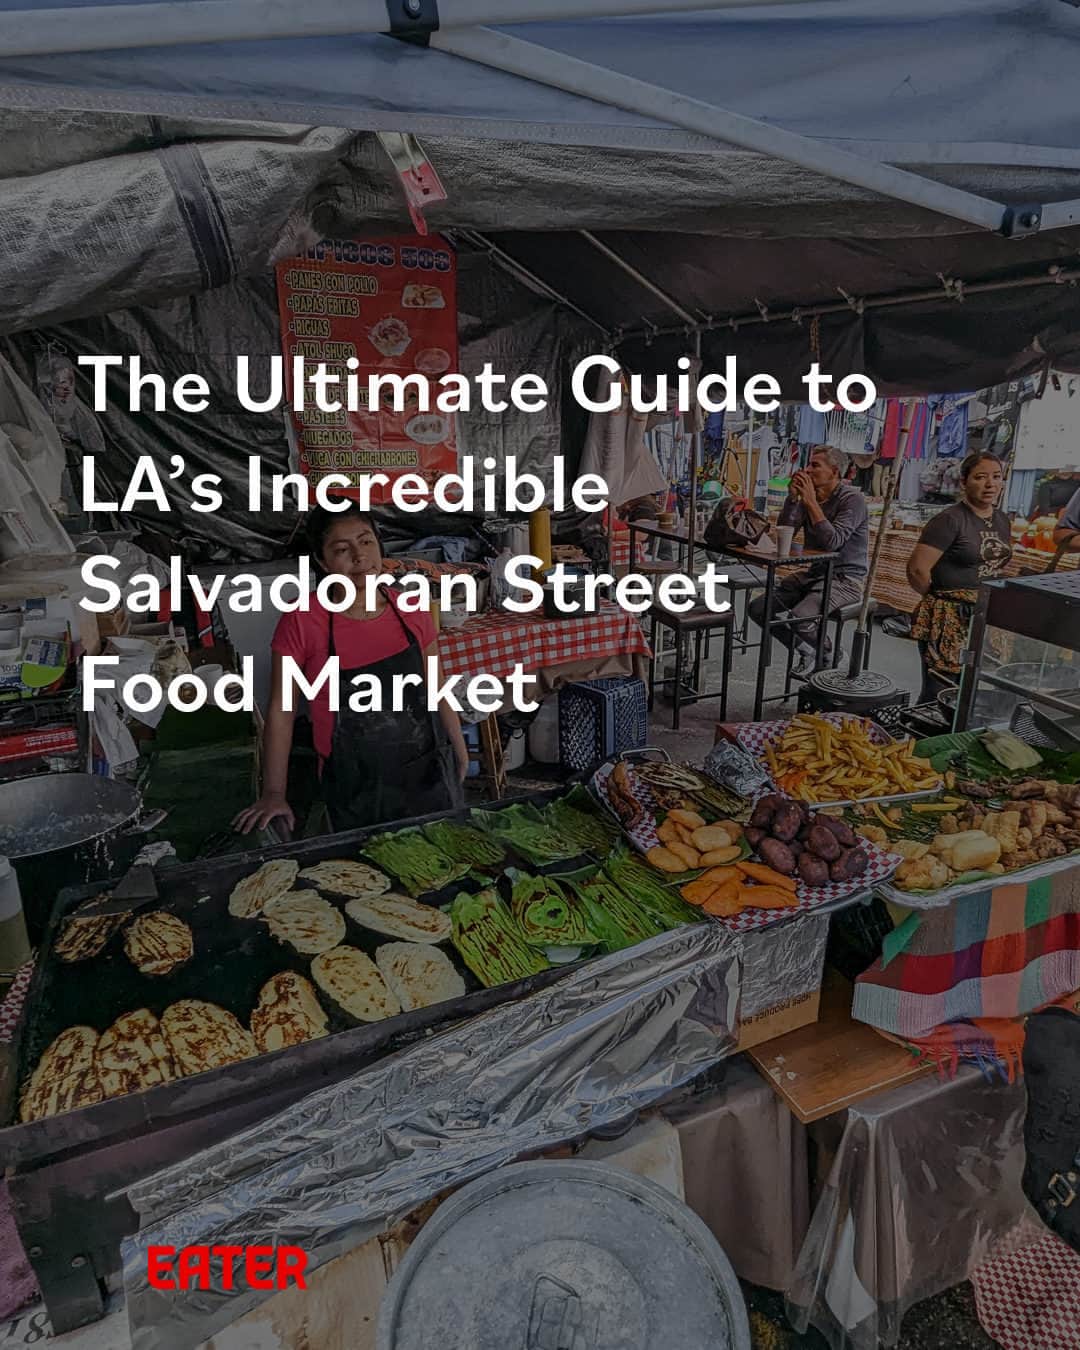 Eater LAのインスタグラム：「For anyone who has traveled in Latin America, the Salvadoran street market in LA's Koreatown along El Salvador Corridor is a thrilling reminder of fresh fruit, lively barkers, and the mingling scent of regional street foods.   “This is the tianguis — you go to Oaxaca, you go to Mexico City — these places are destinations, and I see it as an opportunity to make it a safer place [and] create more entrepreneurship so our families start thriving instead of just surviving,” says LA councilmember Eunisses Hernandez, who represents the district.   While the market was closed last year, it has bounced back with an expanded menu of Salvadoran foods. In fact, there has never been a better time to explore the best Salvadoran cuisine in Los Angeles. Support these vendors by grabbing a plate and a seat at one of the many picnic tables on the ultimate Salvadoran street food tour.  Click on the link in bio to read about the huge street food market, written by Bill Esparza (@streetgourmetla).  📸: @mattatouille」